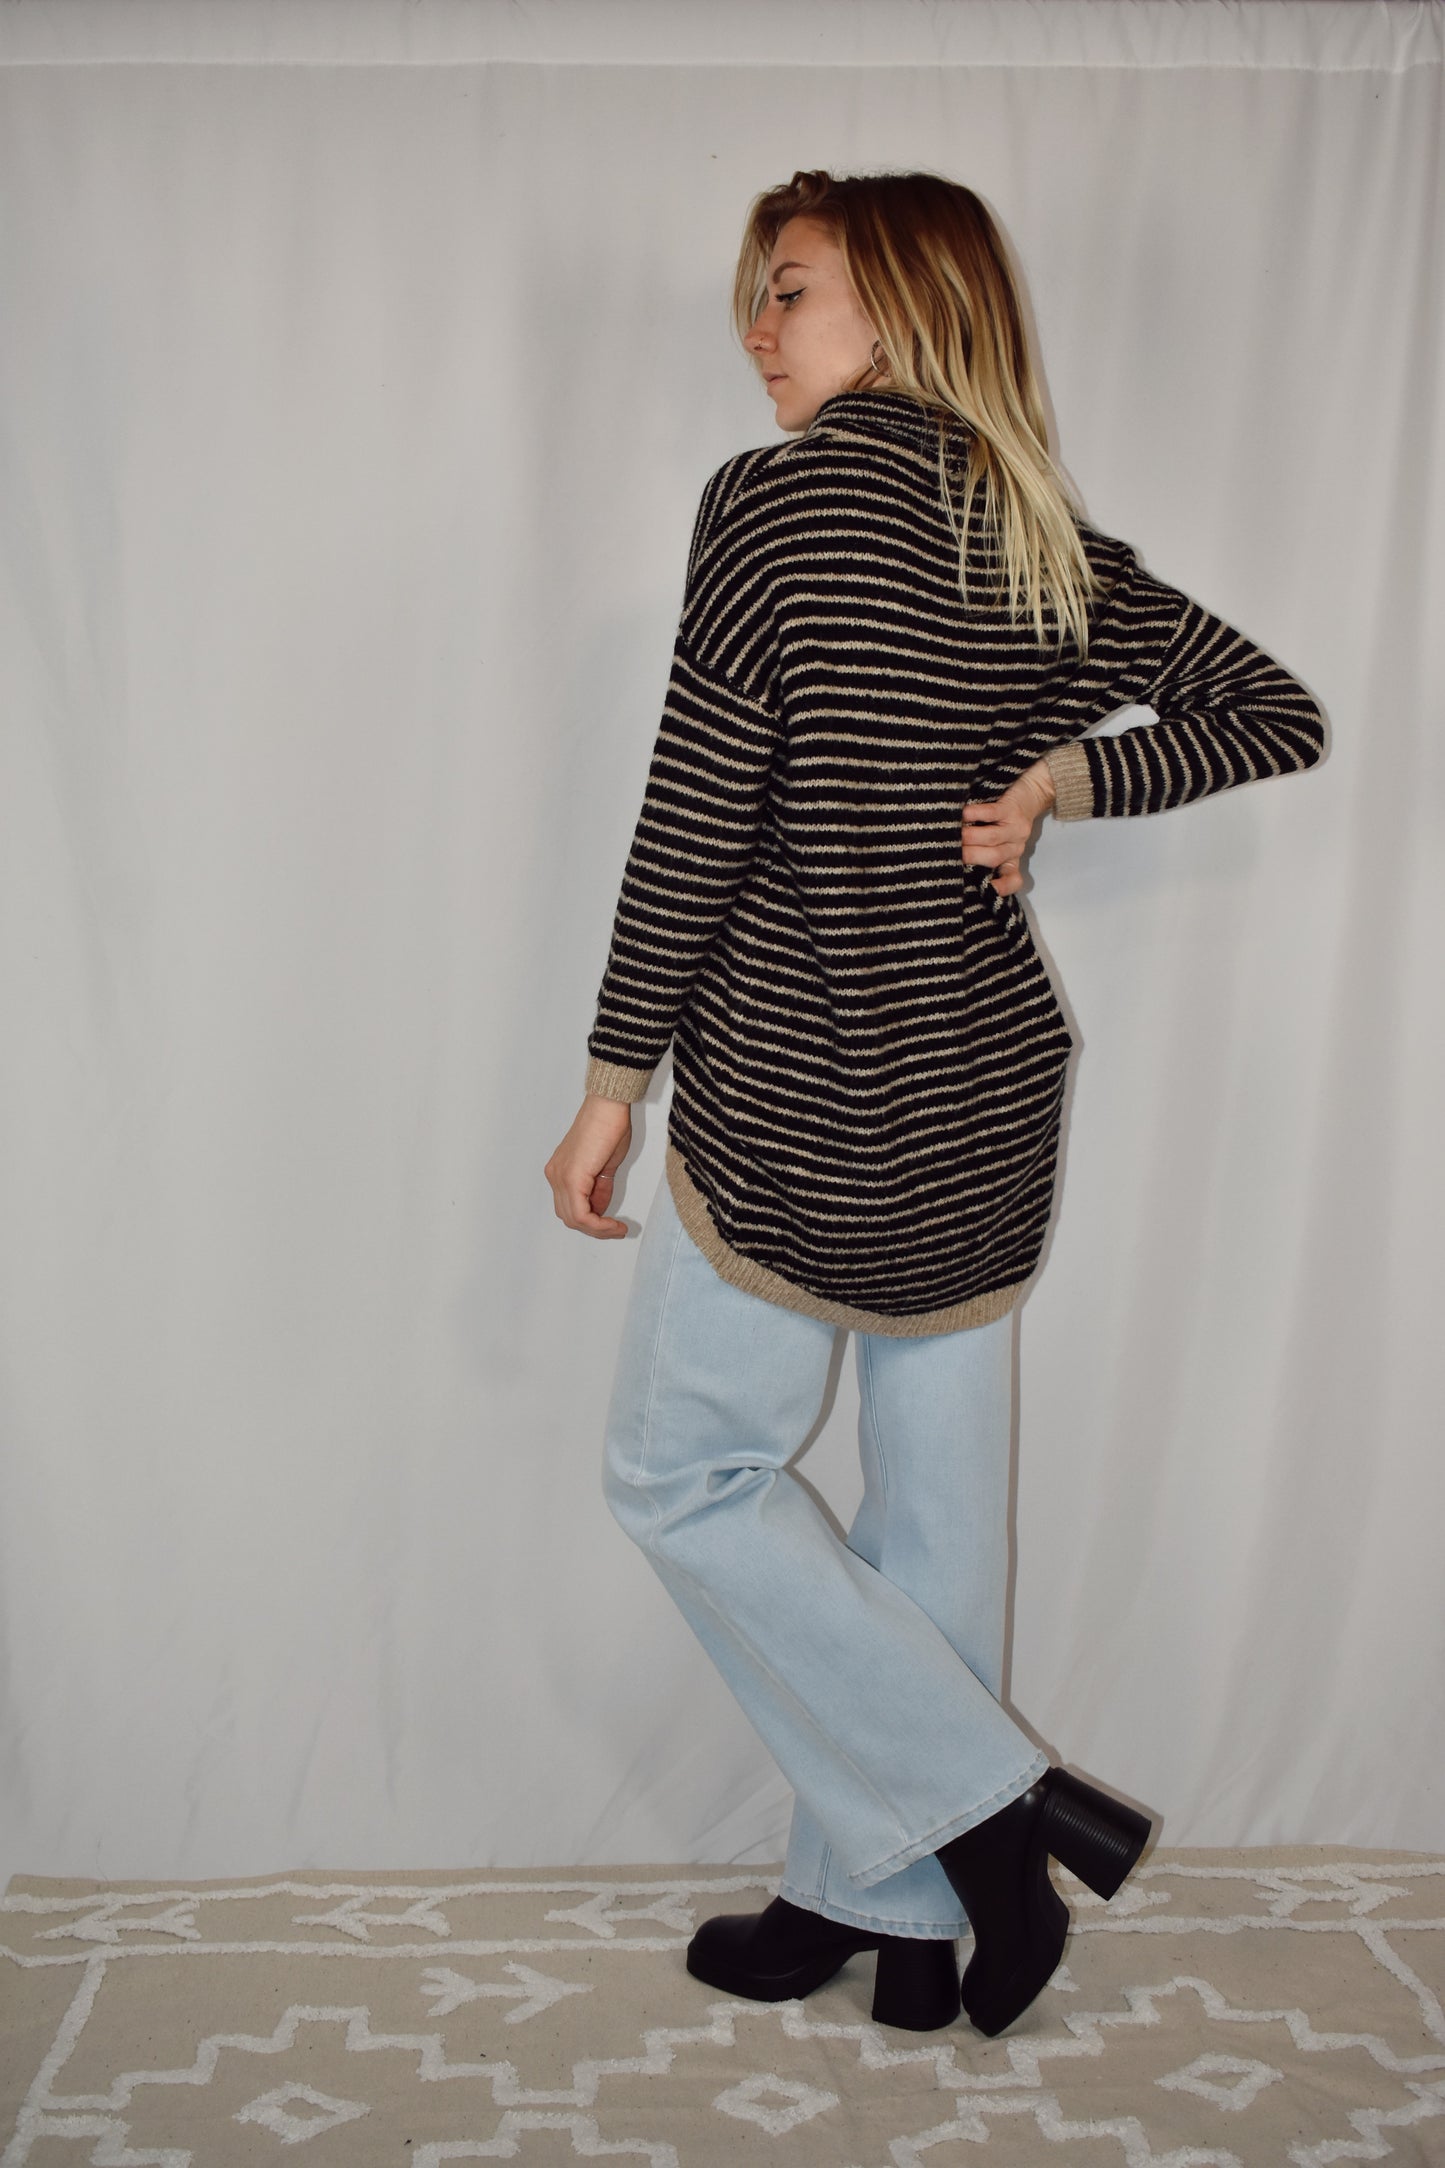 Pullover turtleneck striped sweater. Drop shoulder long sleeves, ribbed hem and sleeve cuffs, and high-low rounded hem. Black and taupe color.